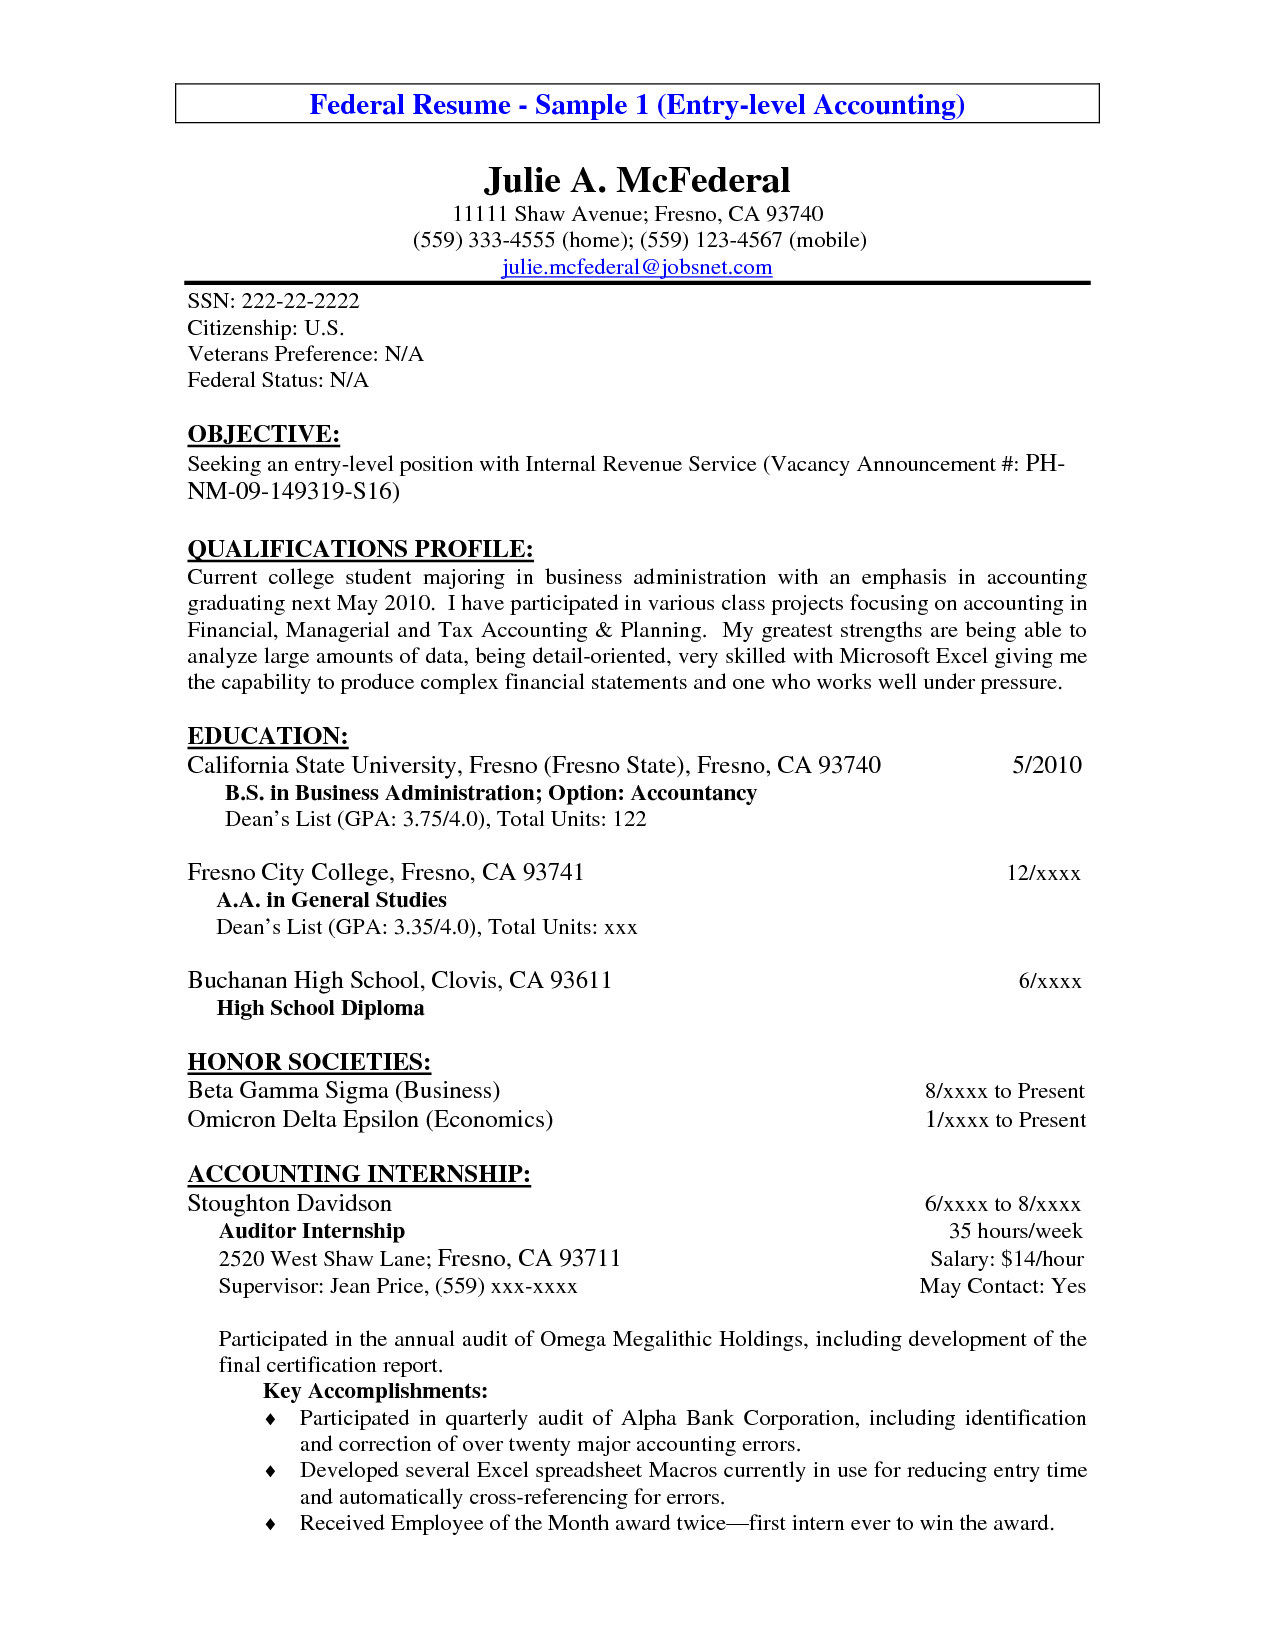 Accounting Resume Objective Sample Resume Objectives Resume